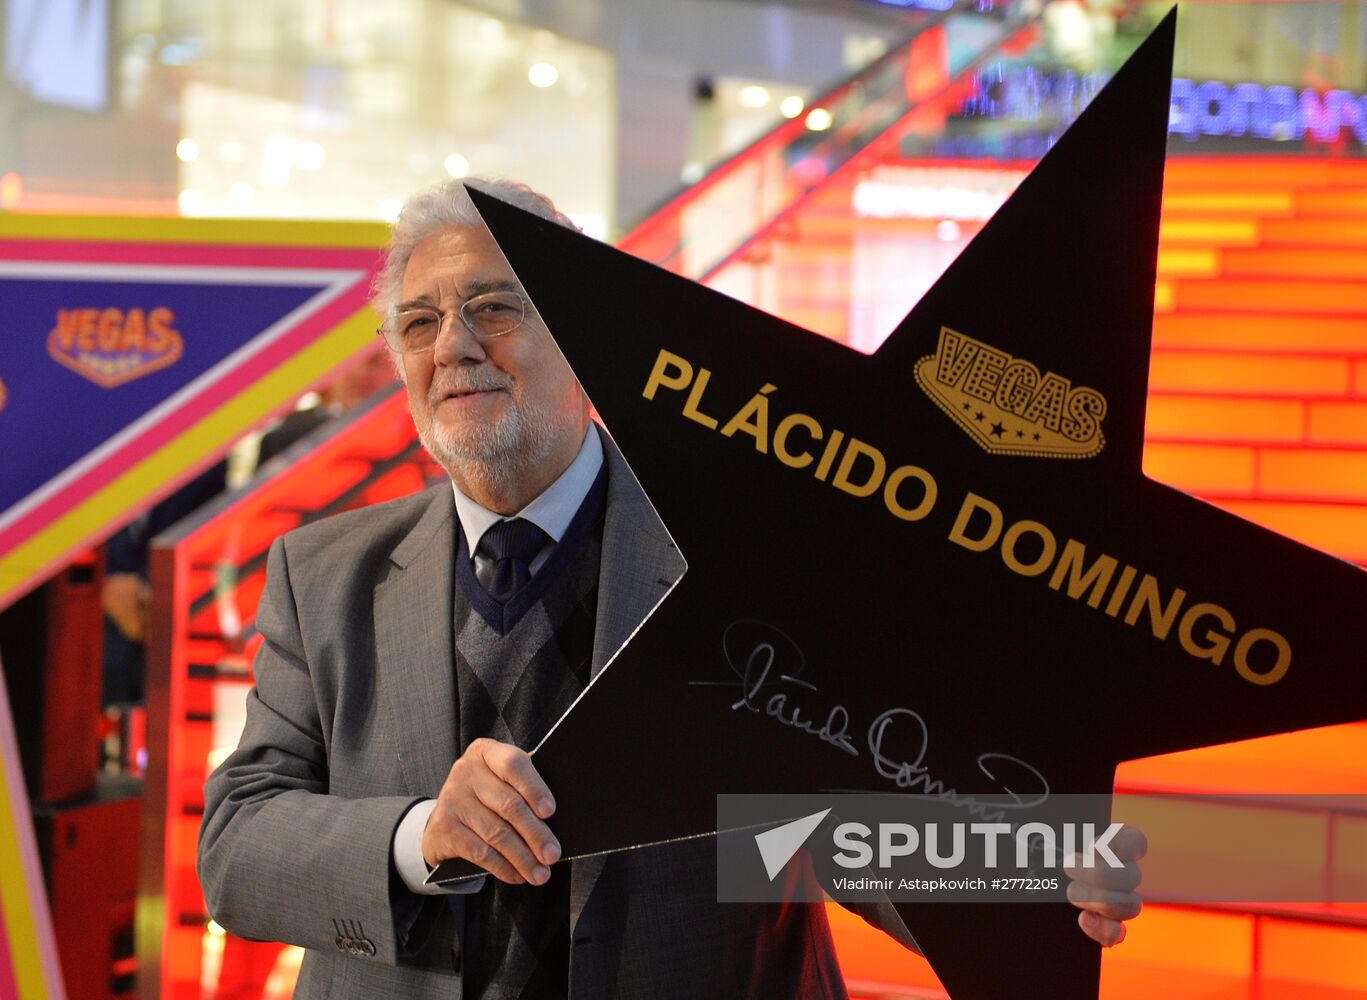 Placido Domingo signs his star in glory alley at Vegas Crocus City.